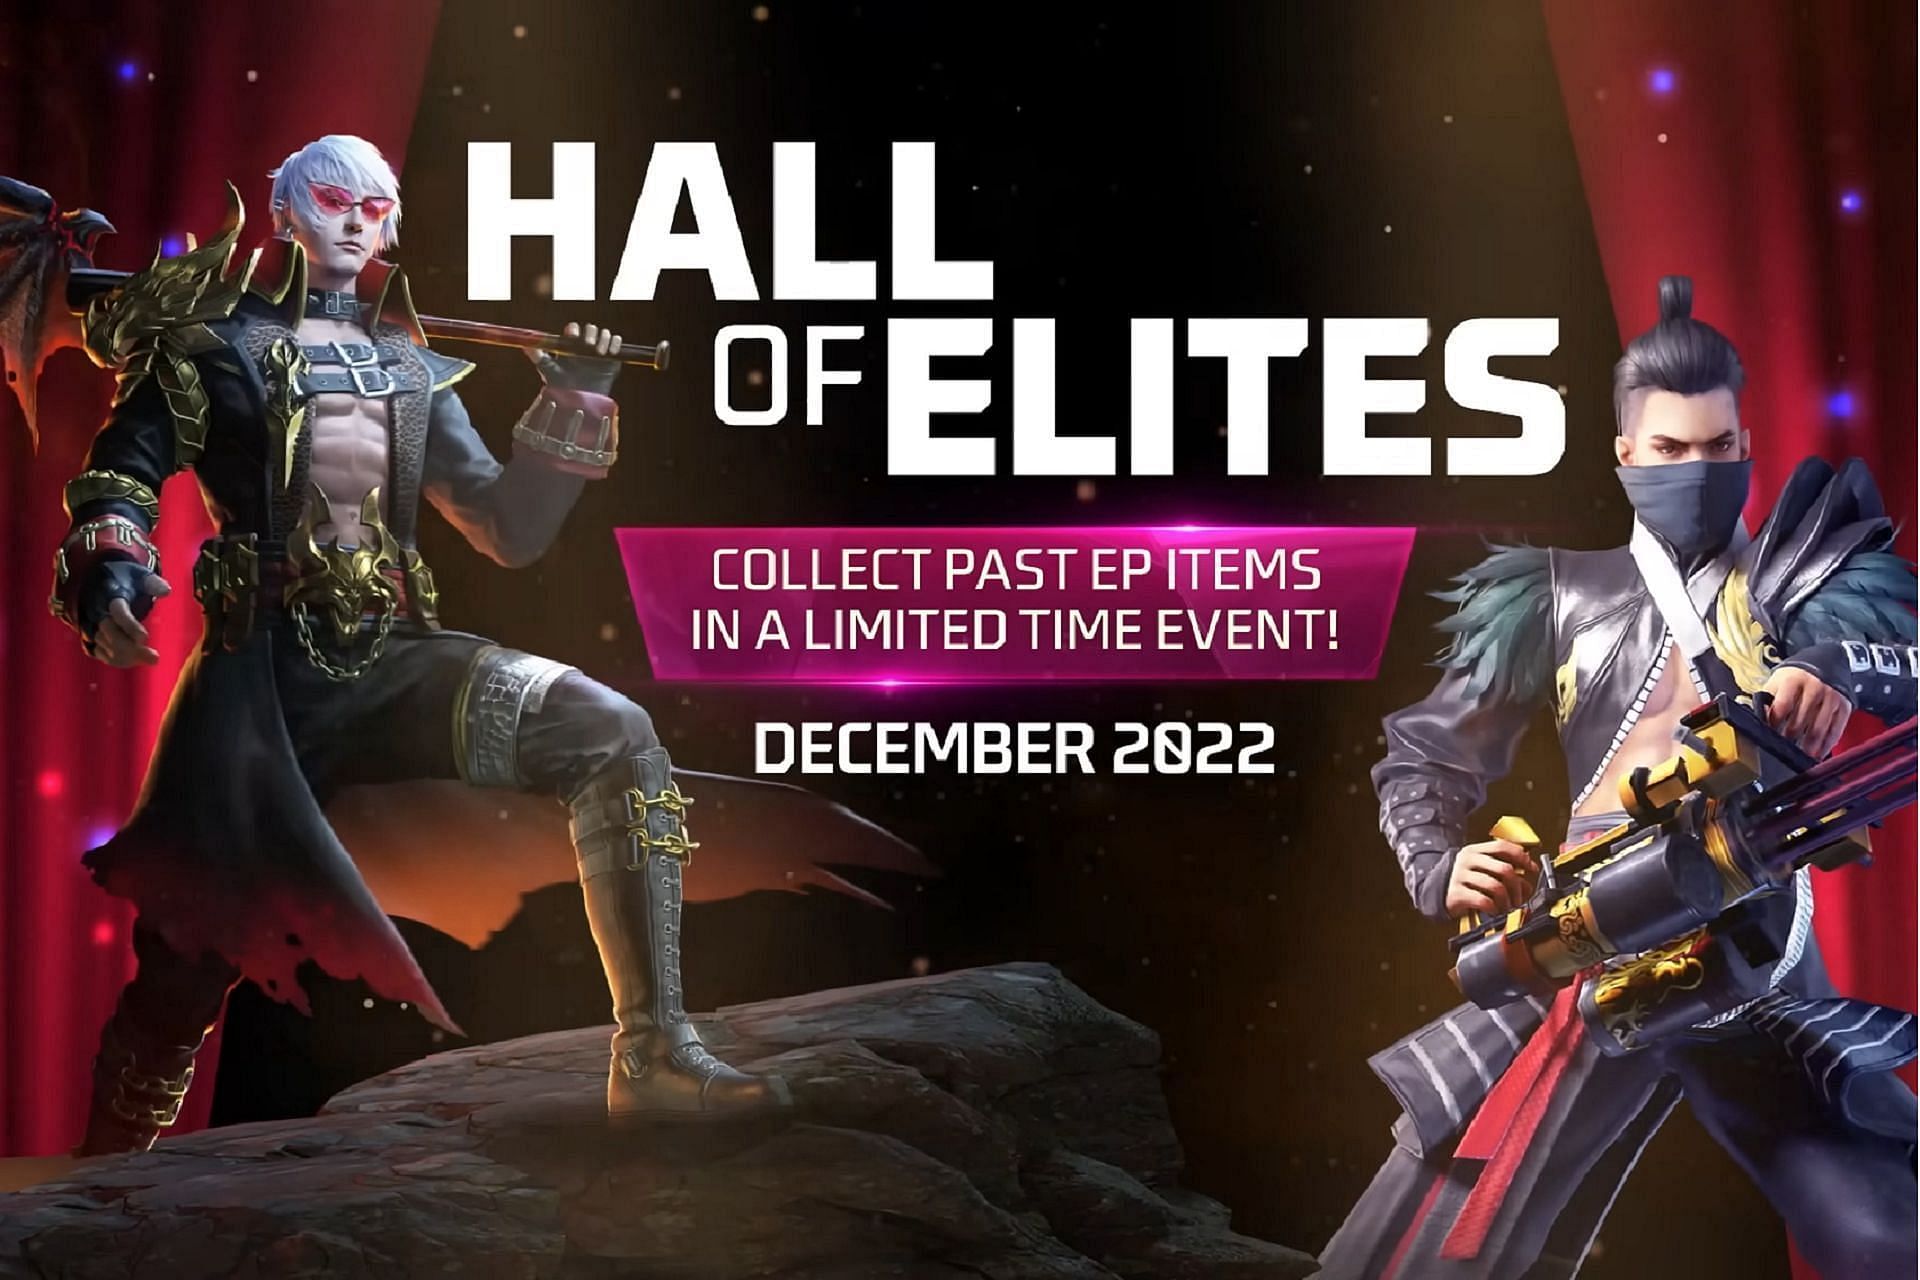 Garena has officially announced the event, but is yet to confirm the details (Image via Garena)